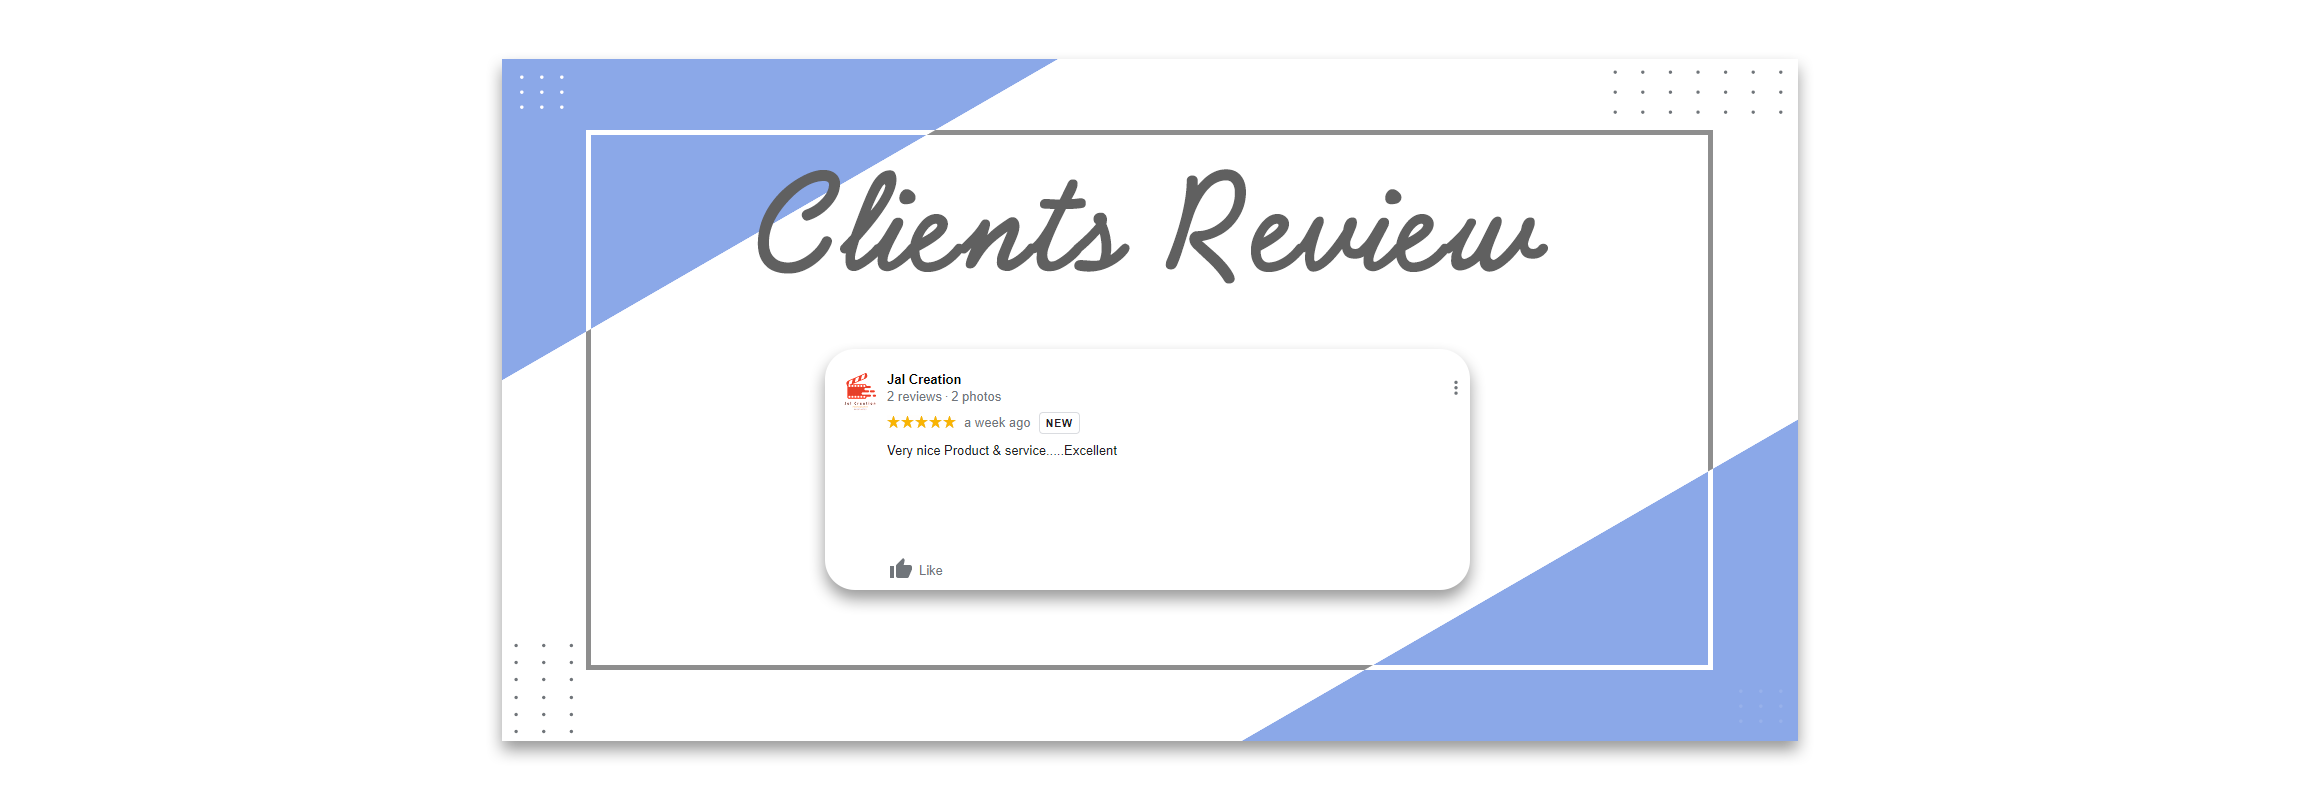 google client review img edit zone india 14